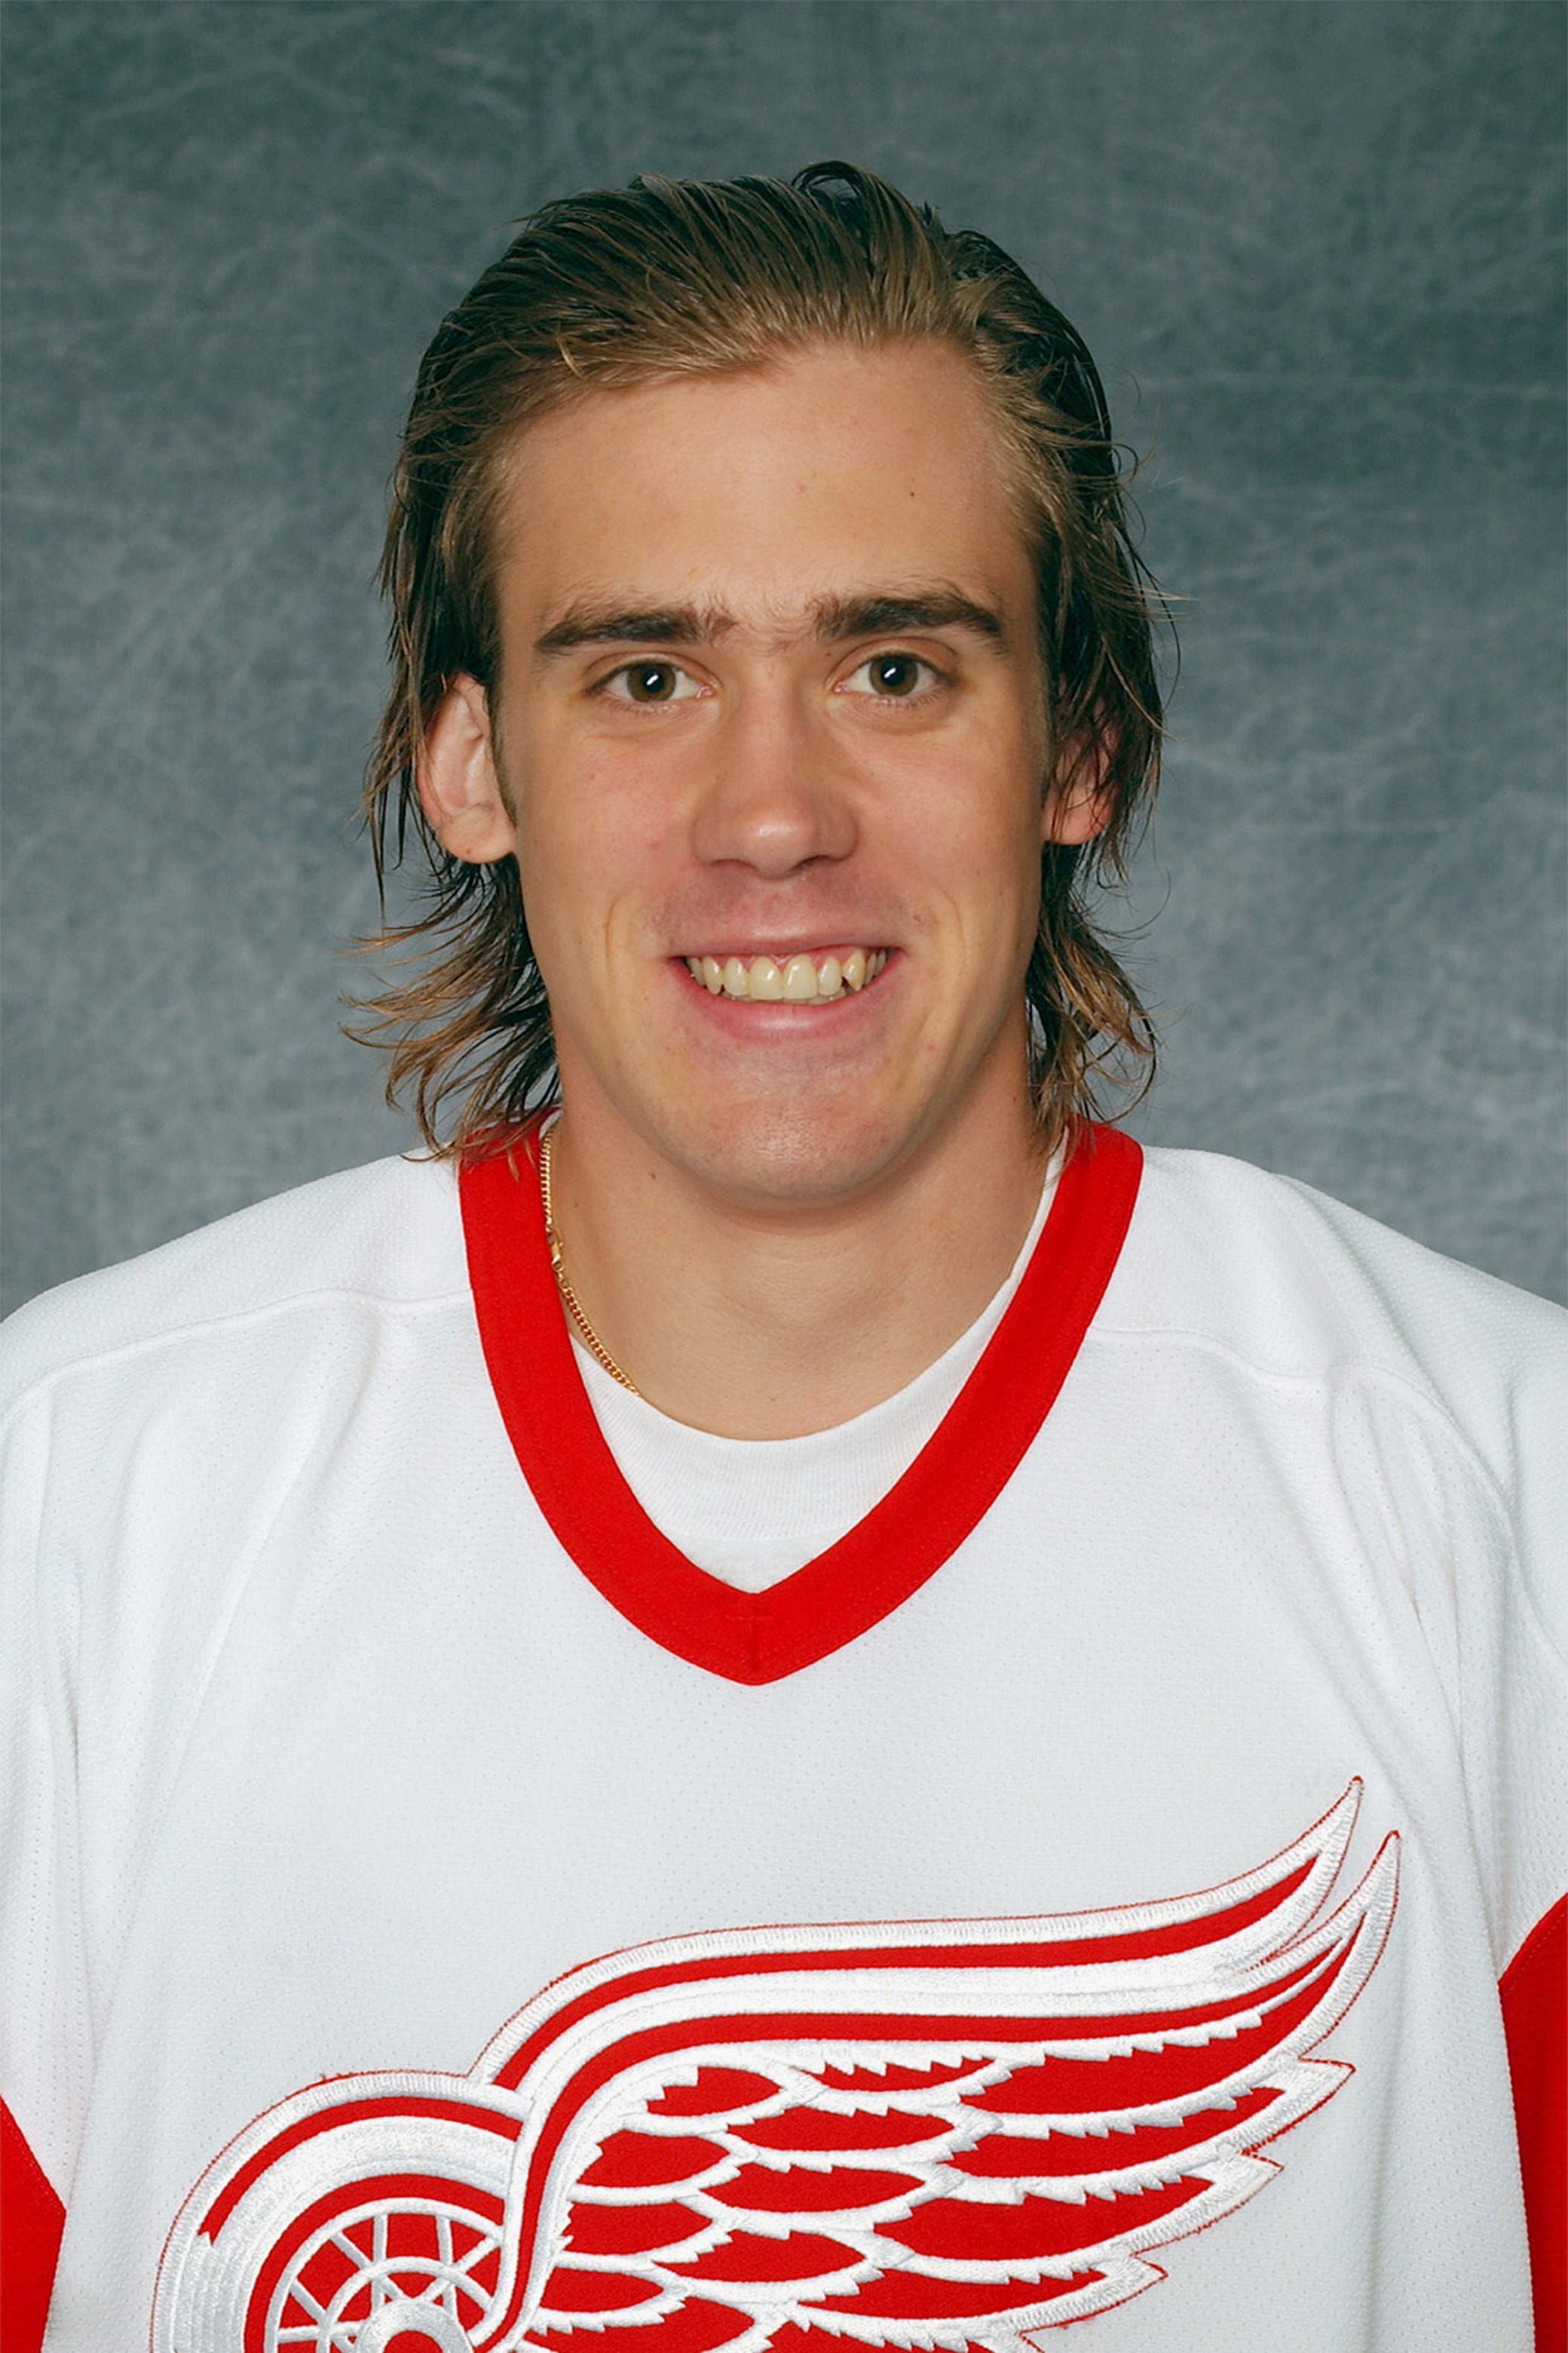 Henrik Zetterberg was selected by the Red Wings in the seventh round (No. 210 overall) in the 1999 NHL Draft.